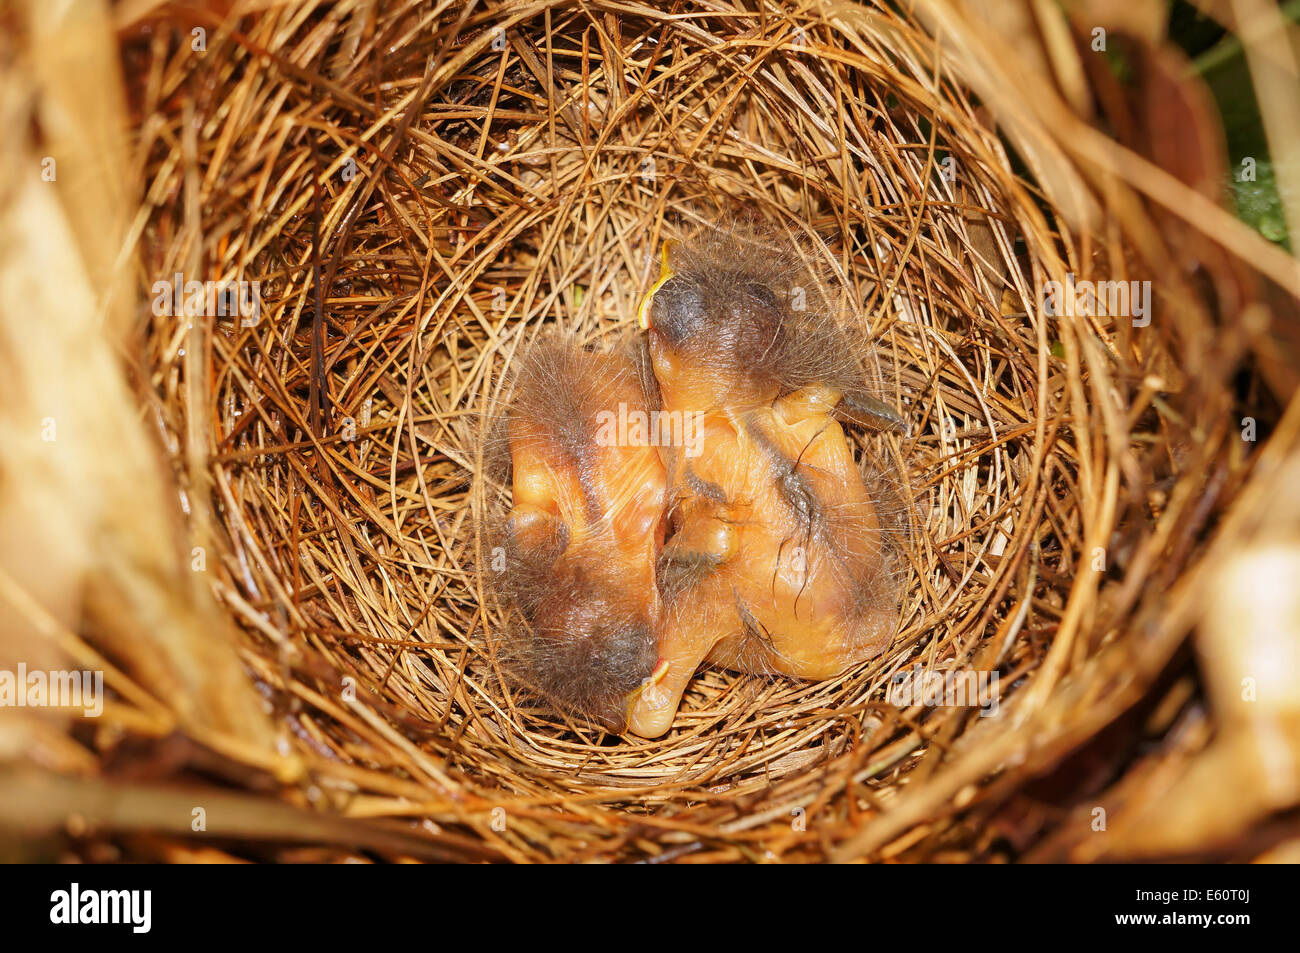 close-up view of bird nest with two Lesser Kiskadee flycatcher chicks sleeping, Central America, Costa Rica Stock Photo